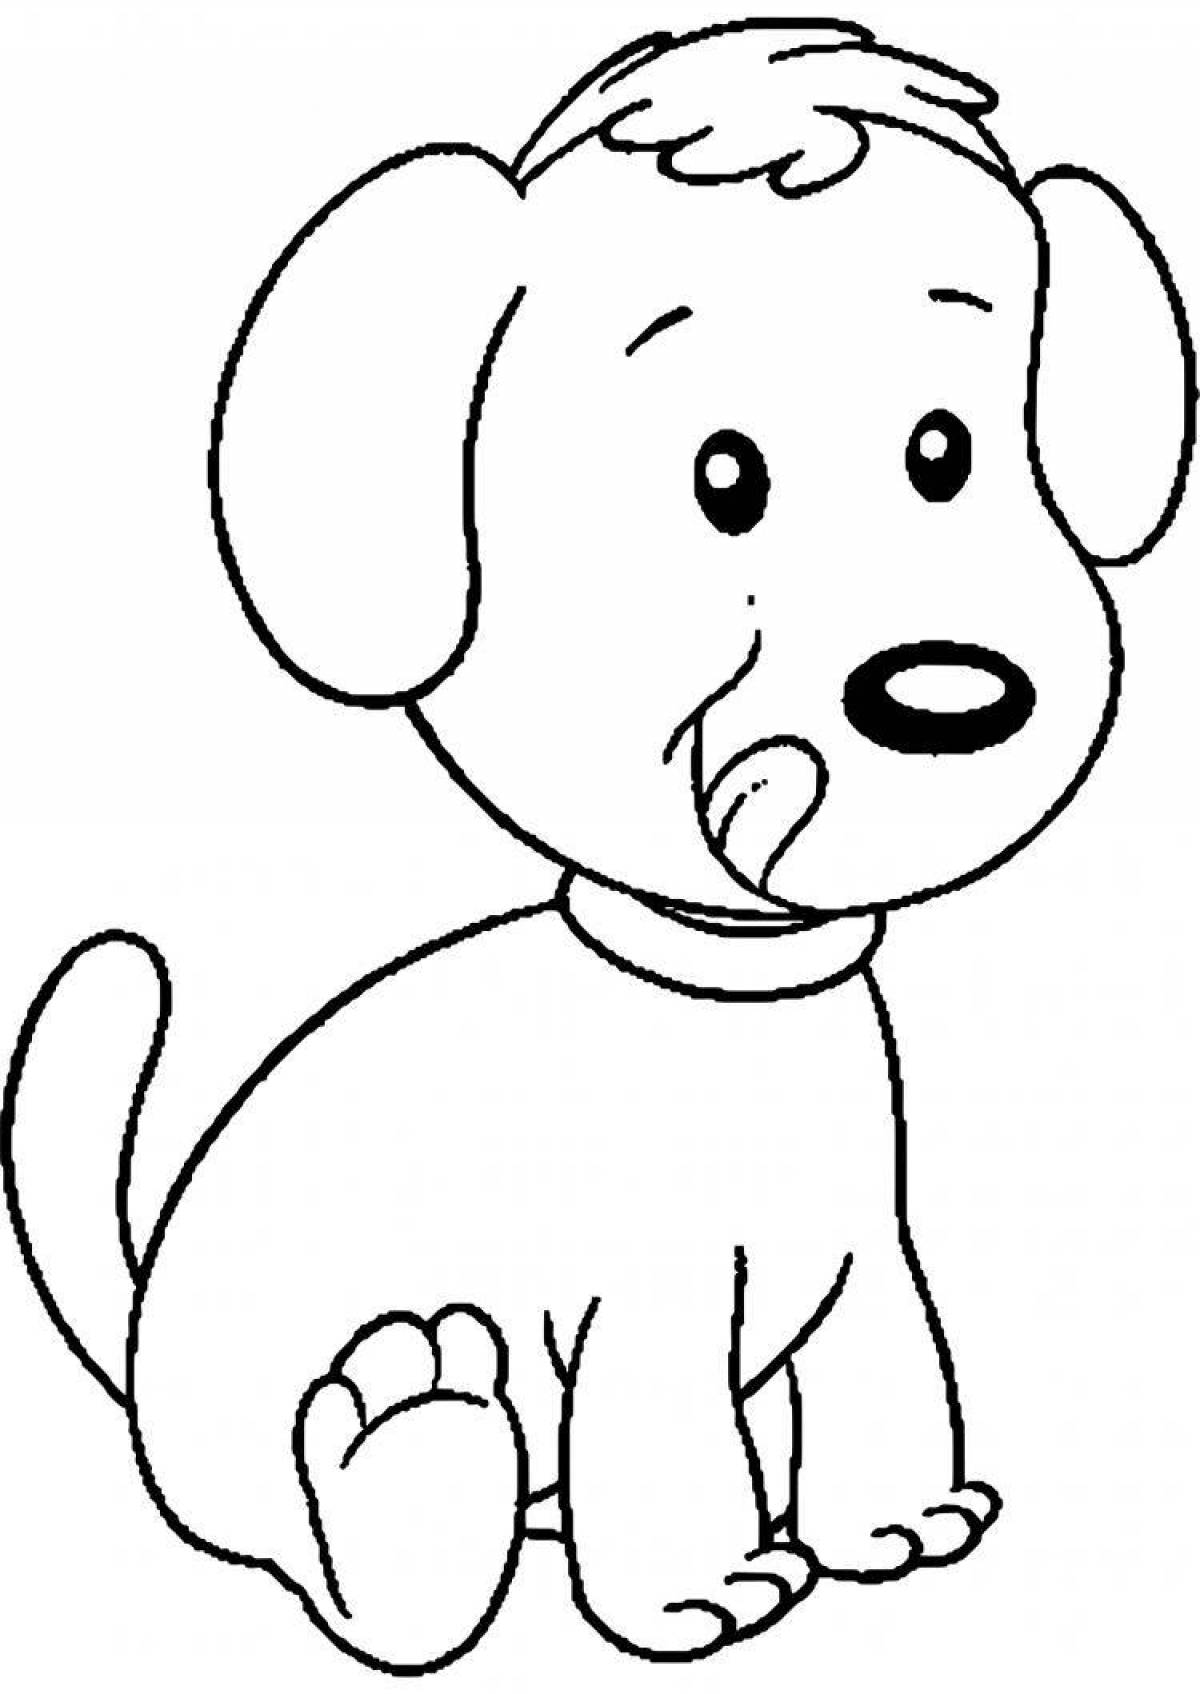 Joyful coloring dog for children 3-4 years old